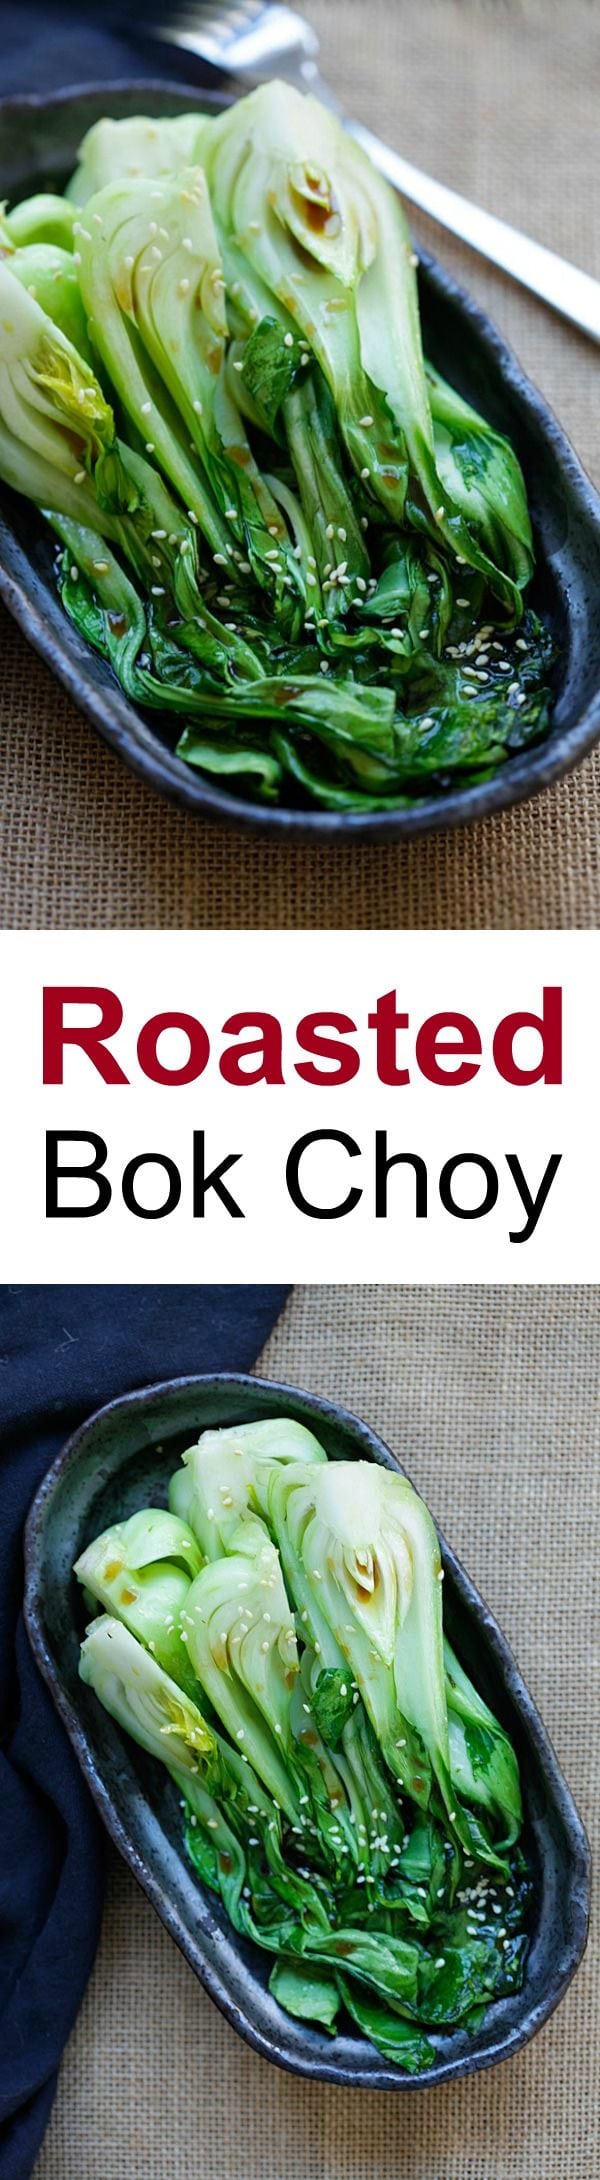 Roasted Bok Choy - easiest vegetable recipe that takes only 10 mins. Healthy and delicious with a soy-sesame dressing, great for dinner | rasamalaysia.com